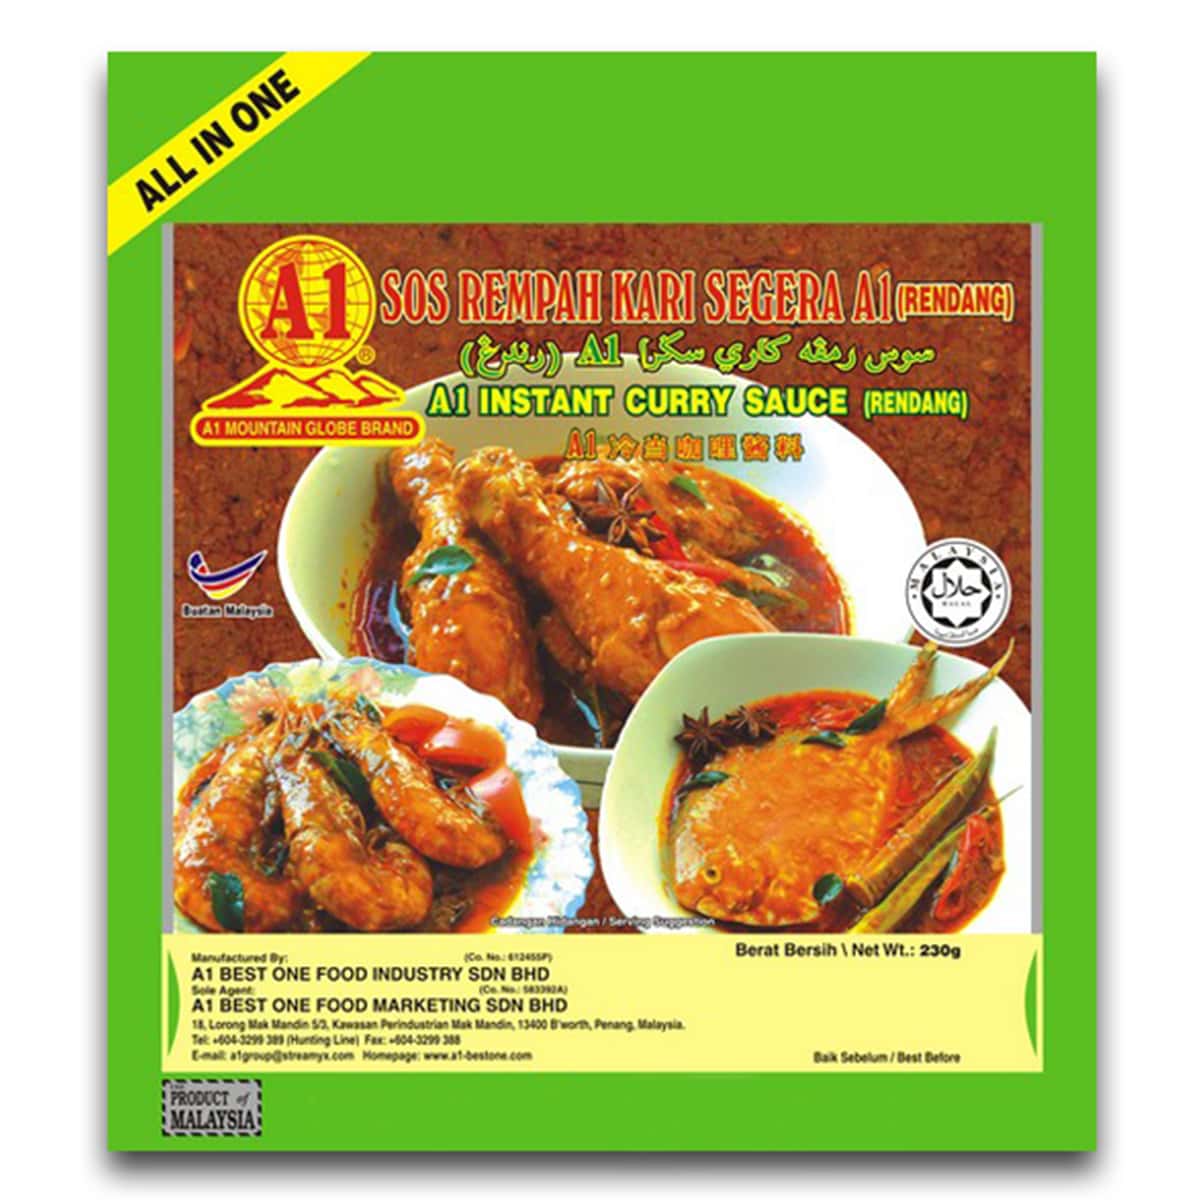 Buy A1 Mountain Globe Brand Instant Curry Sauce (Rendang) - 230 gm